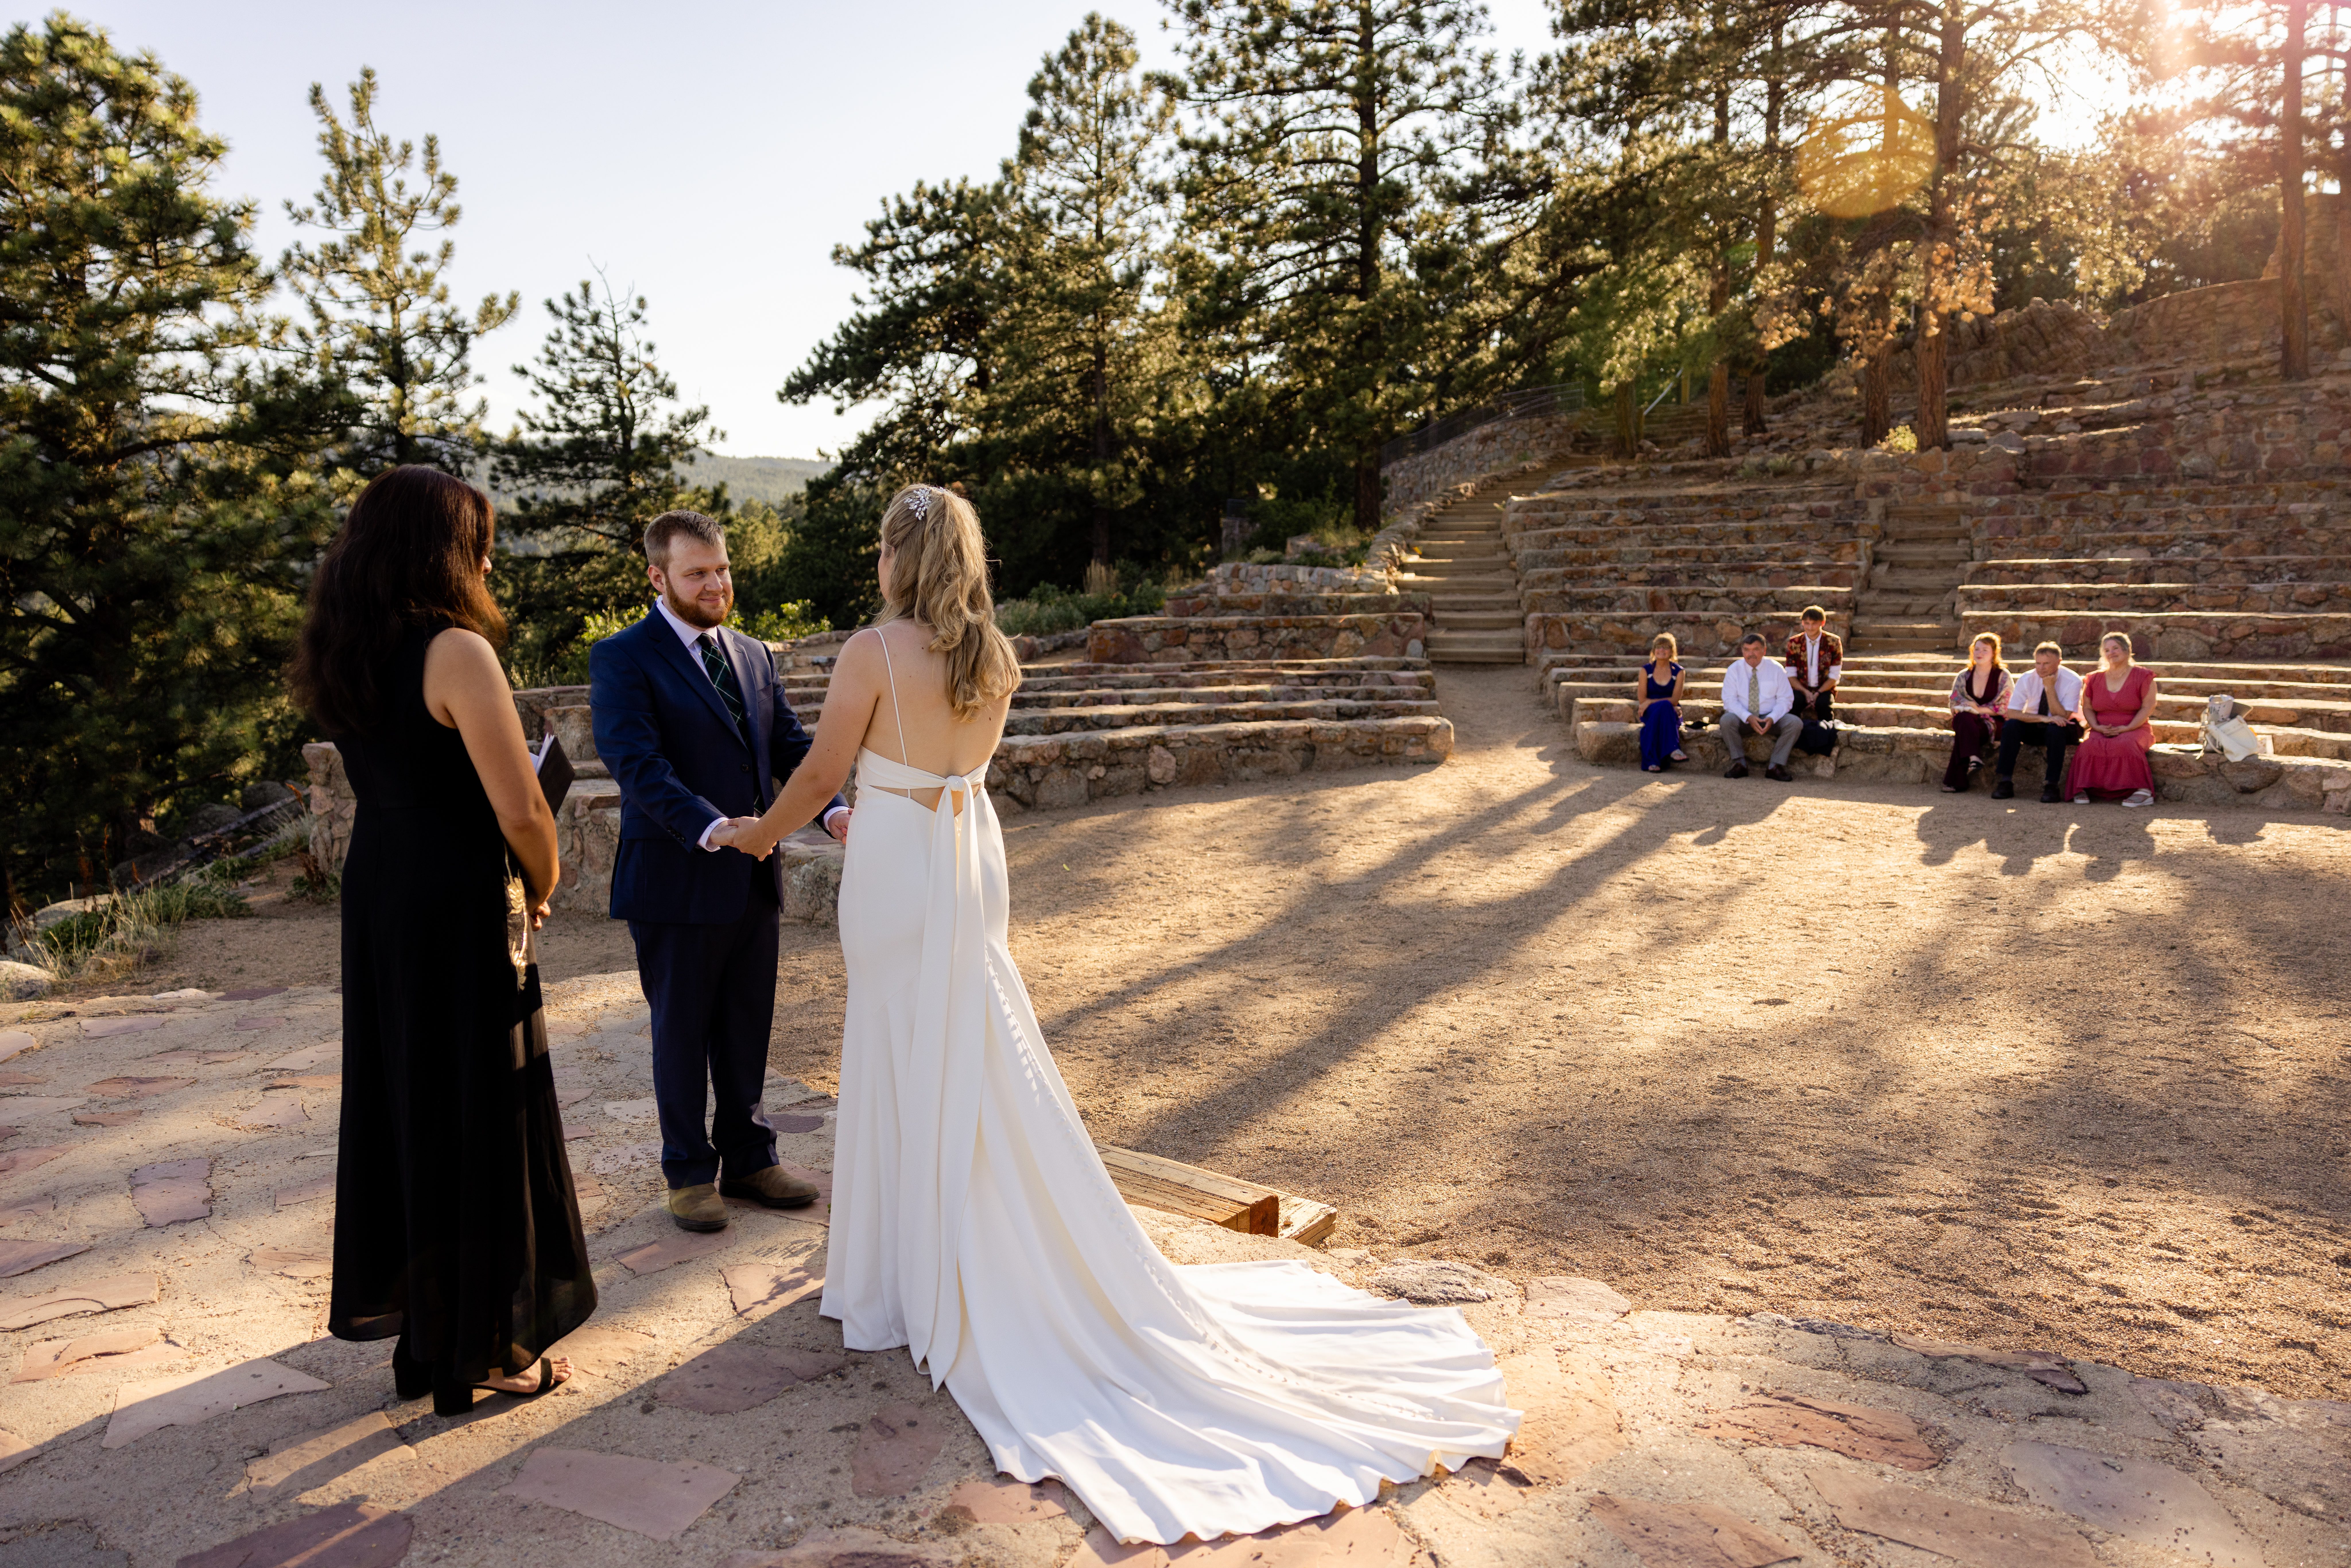 The bride and groom holding hands during their ceremony, with their guests watching in the distance at their Sunrise Amphitheater wedding.